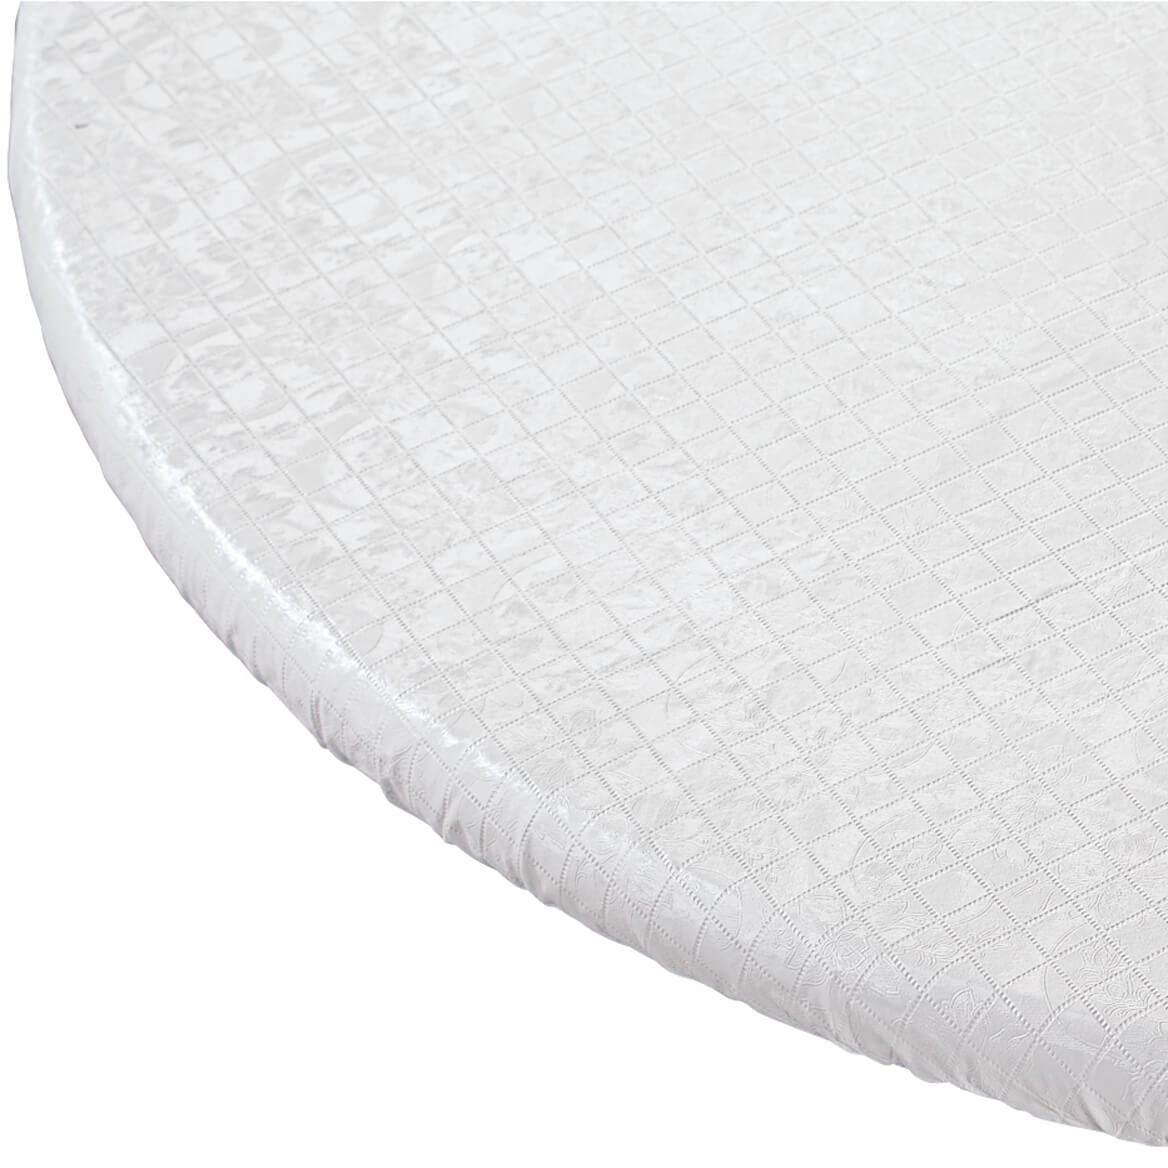 Elasticized Table Pad White 48 X 66, 48 Round Table Pads